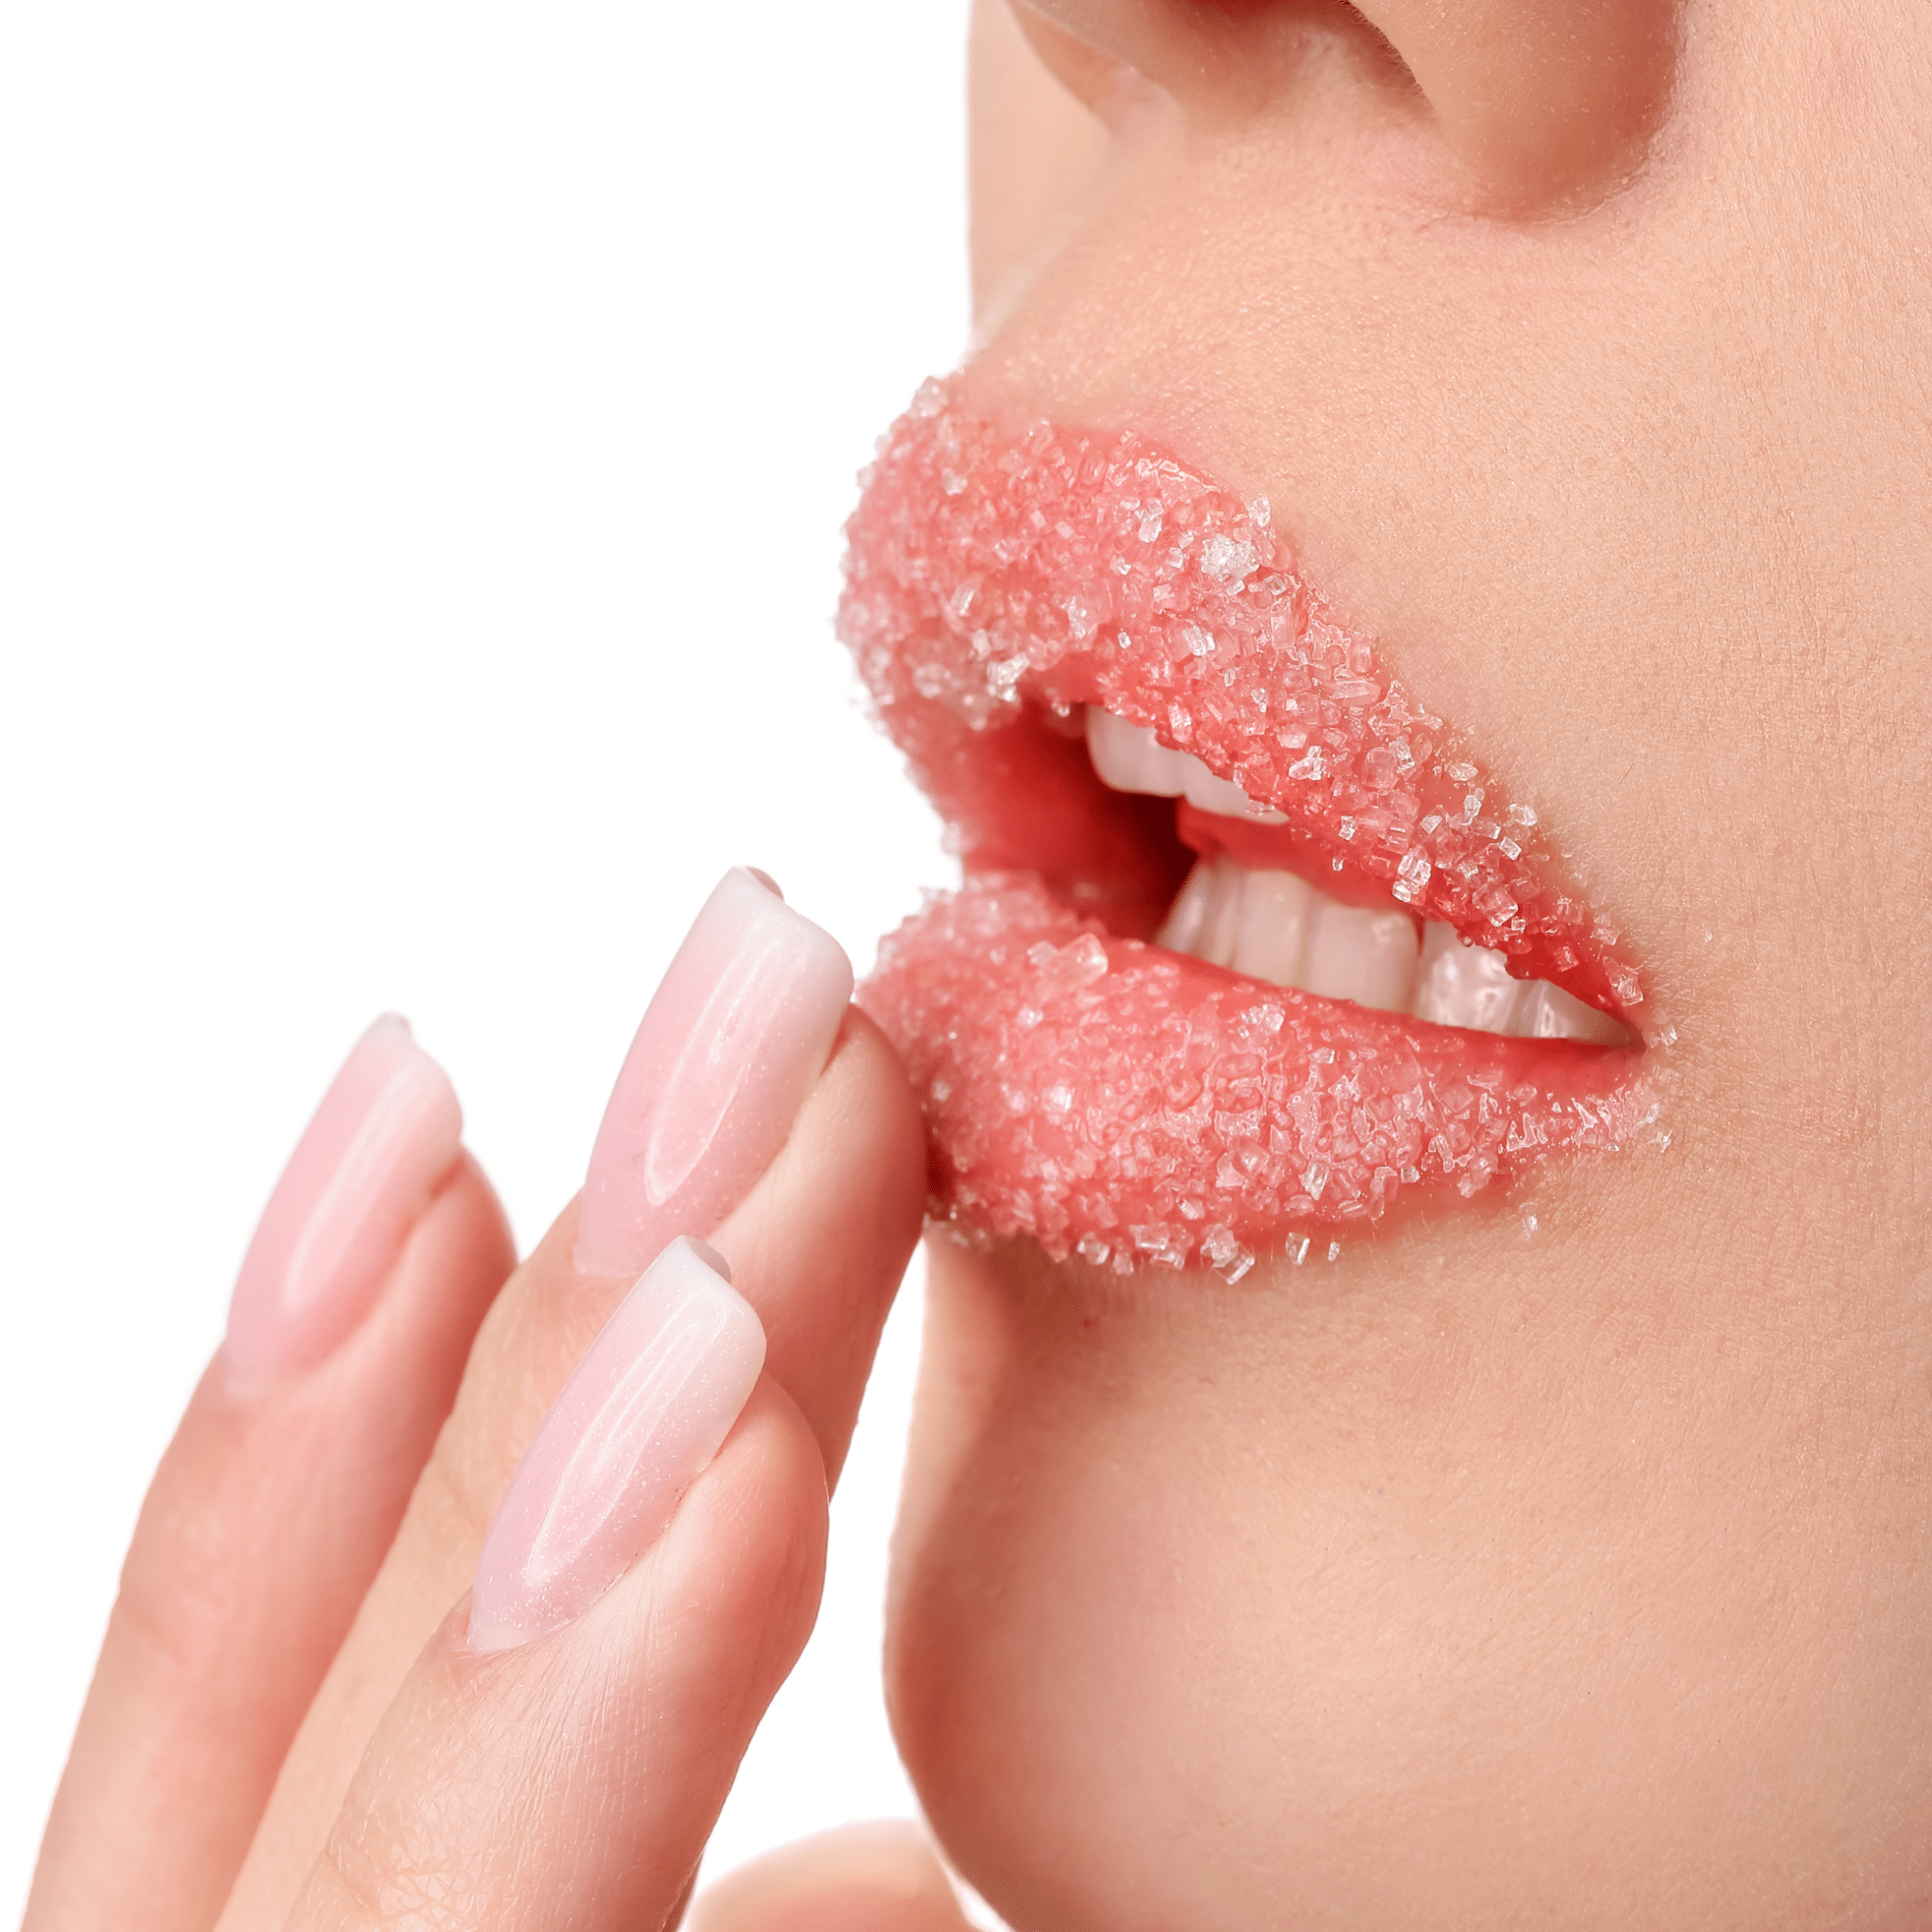 A woman applying our lip scrub to her lips to exfoliate